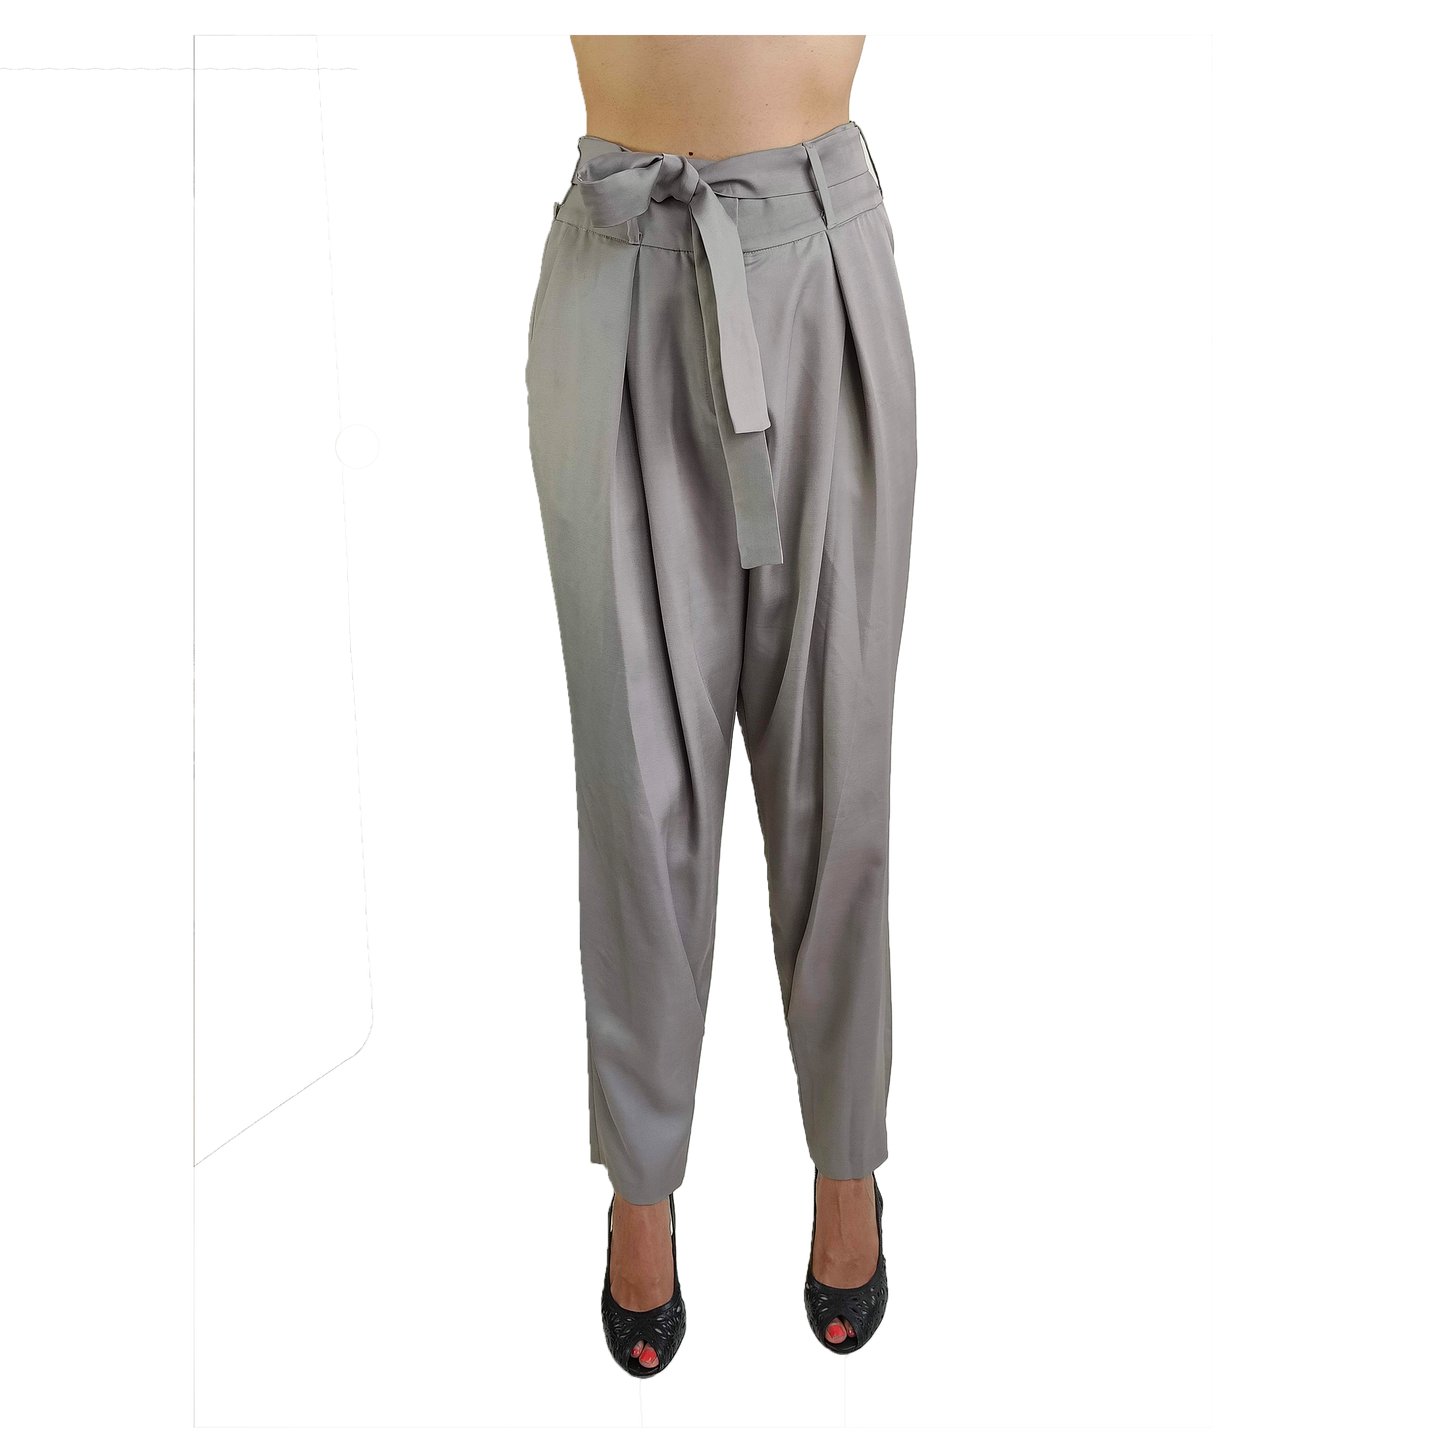 Gray low crotch pant in draping cotton viscose satin, including an optional tie belt